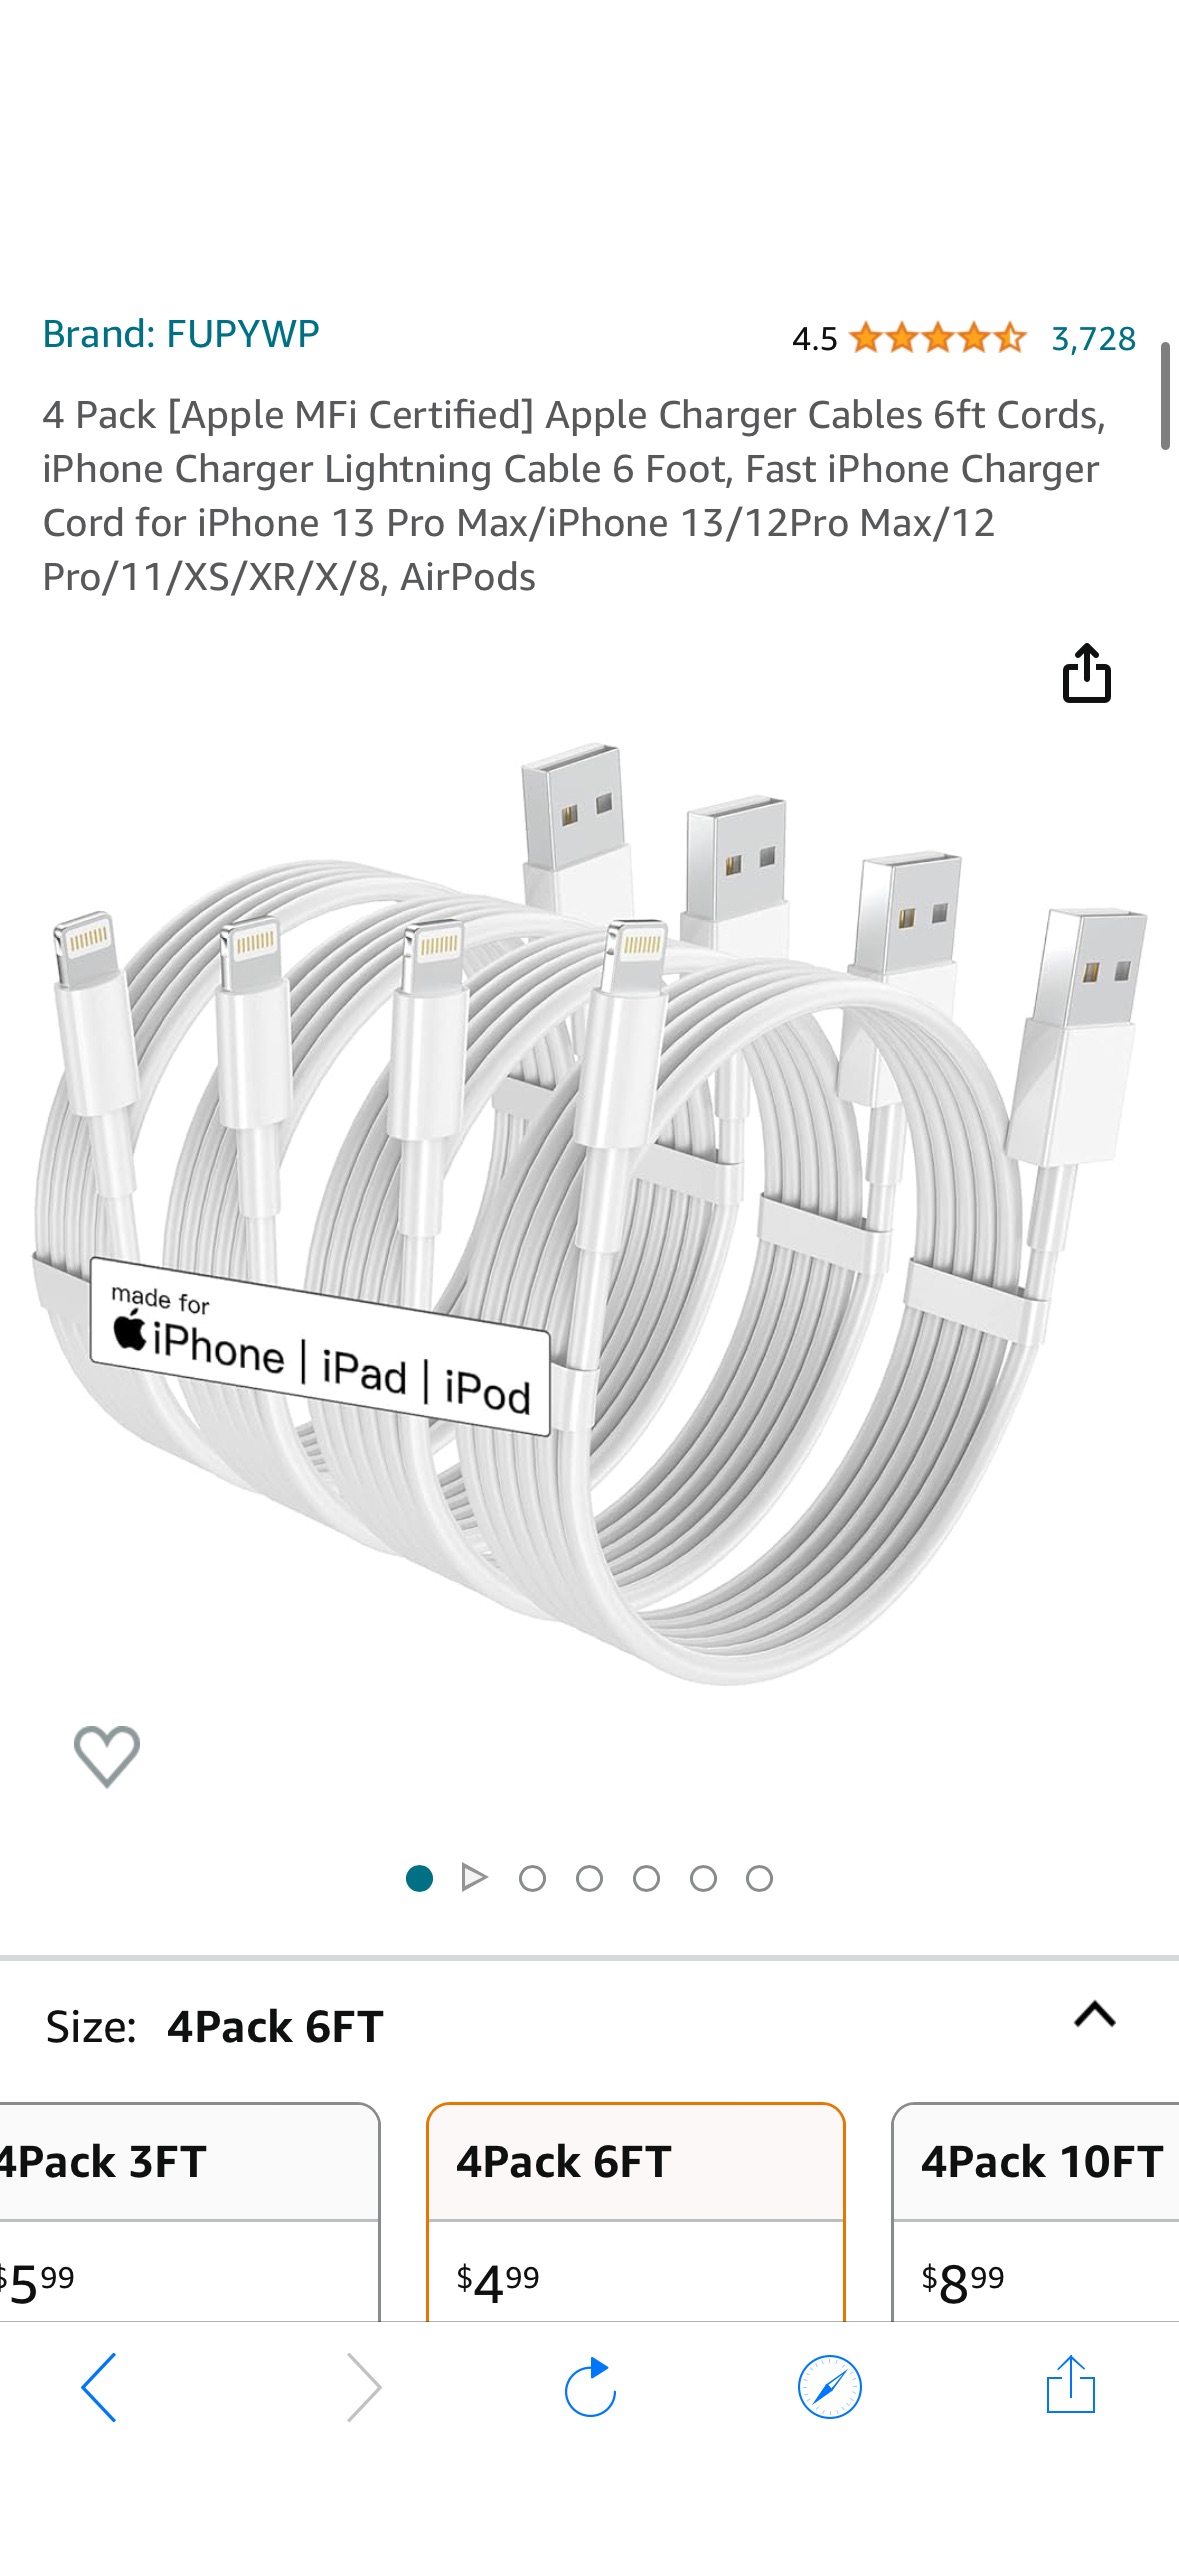 Amazon.com: 4 Pack [Apple MFi Certified] Apple Charger Cables 6ft Cords, iPhone Charger Lightning Cable 6 Foot, Fast iPhone Charger Cord for iPhone 13 Pro Max/iPhone 13/12Pro Max/12 Pro/11/XS/XR/X/8, 